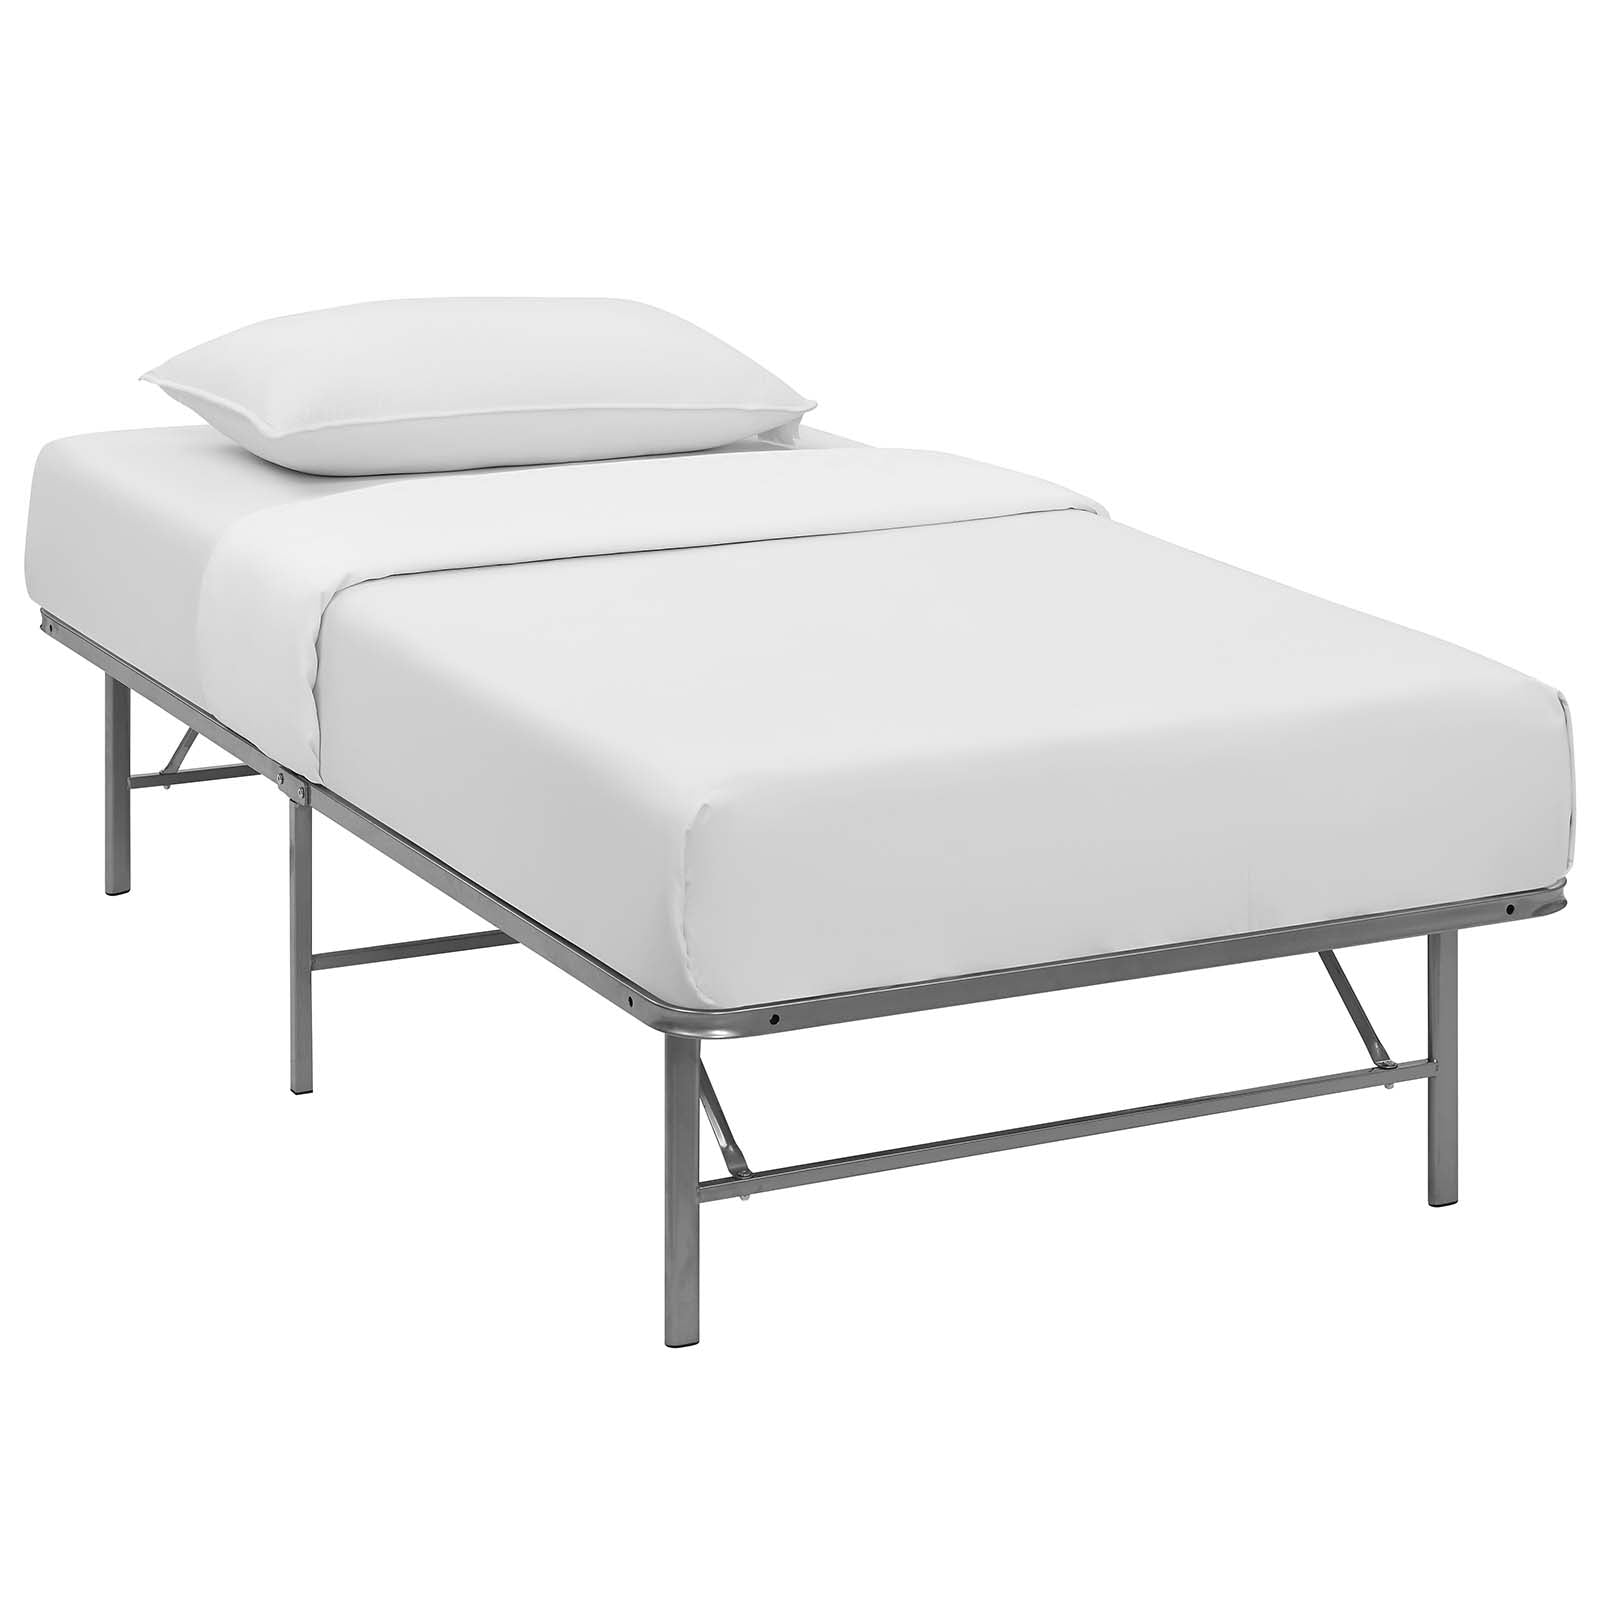 Horizon Twin Stainless Steel Bed Frame - East Shore Modern Home Furnishings